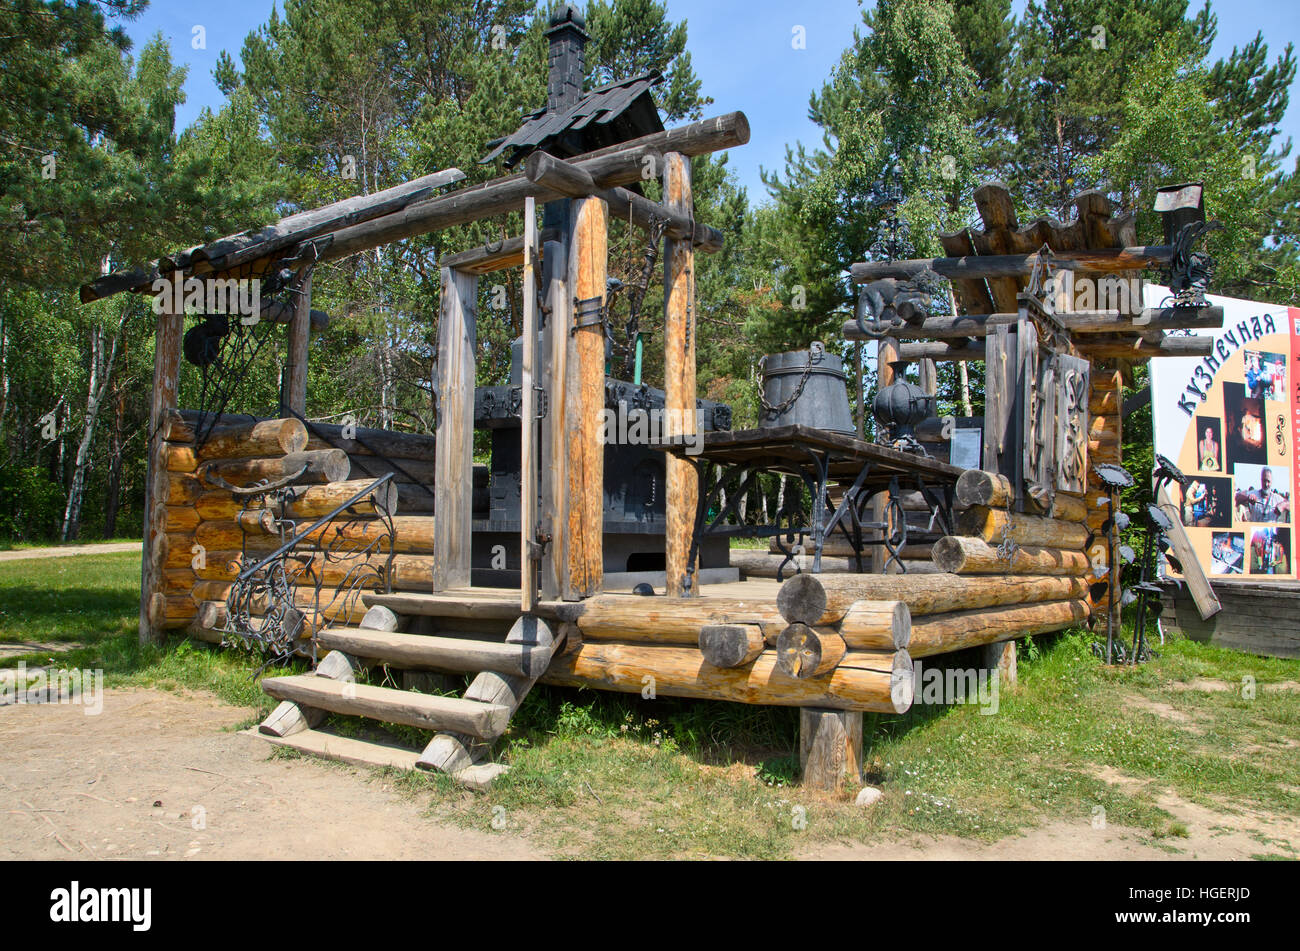 Taltsy Museum f Wooden Architectural and Ethonography near Irkutsk town. Stock Photo